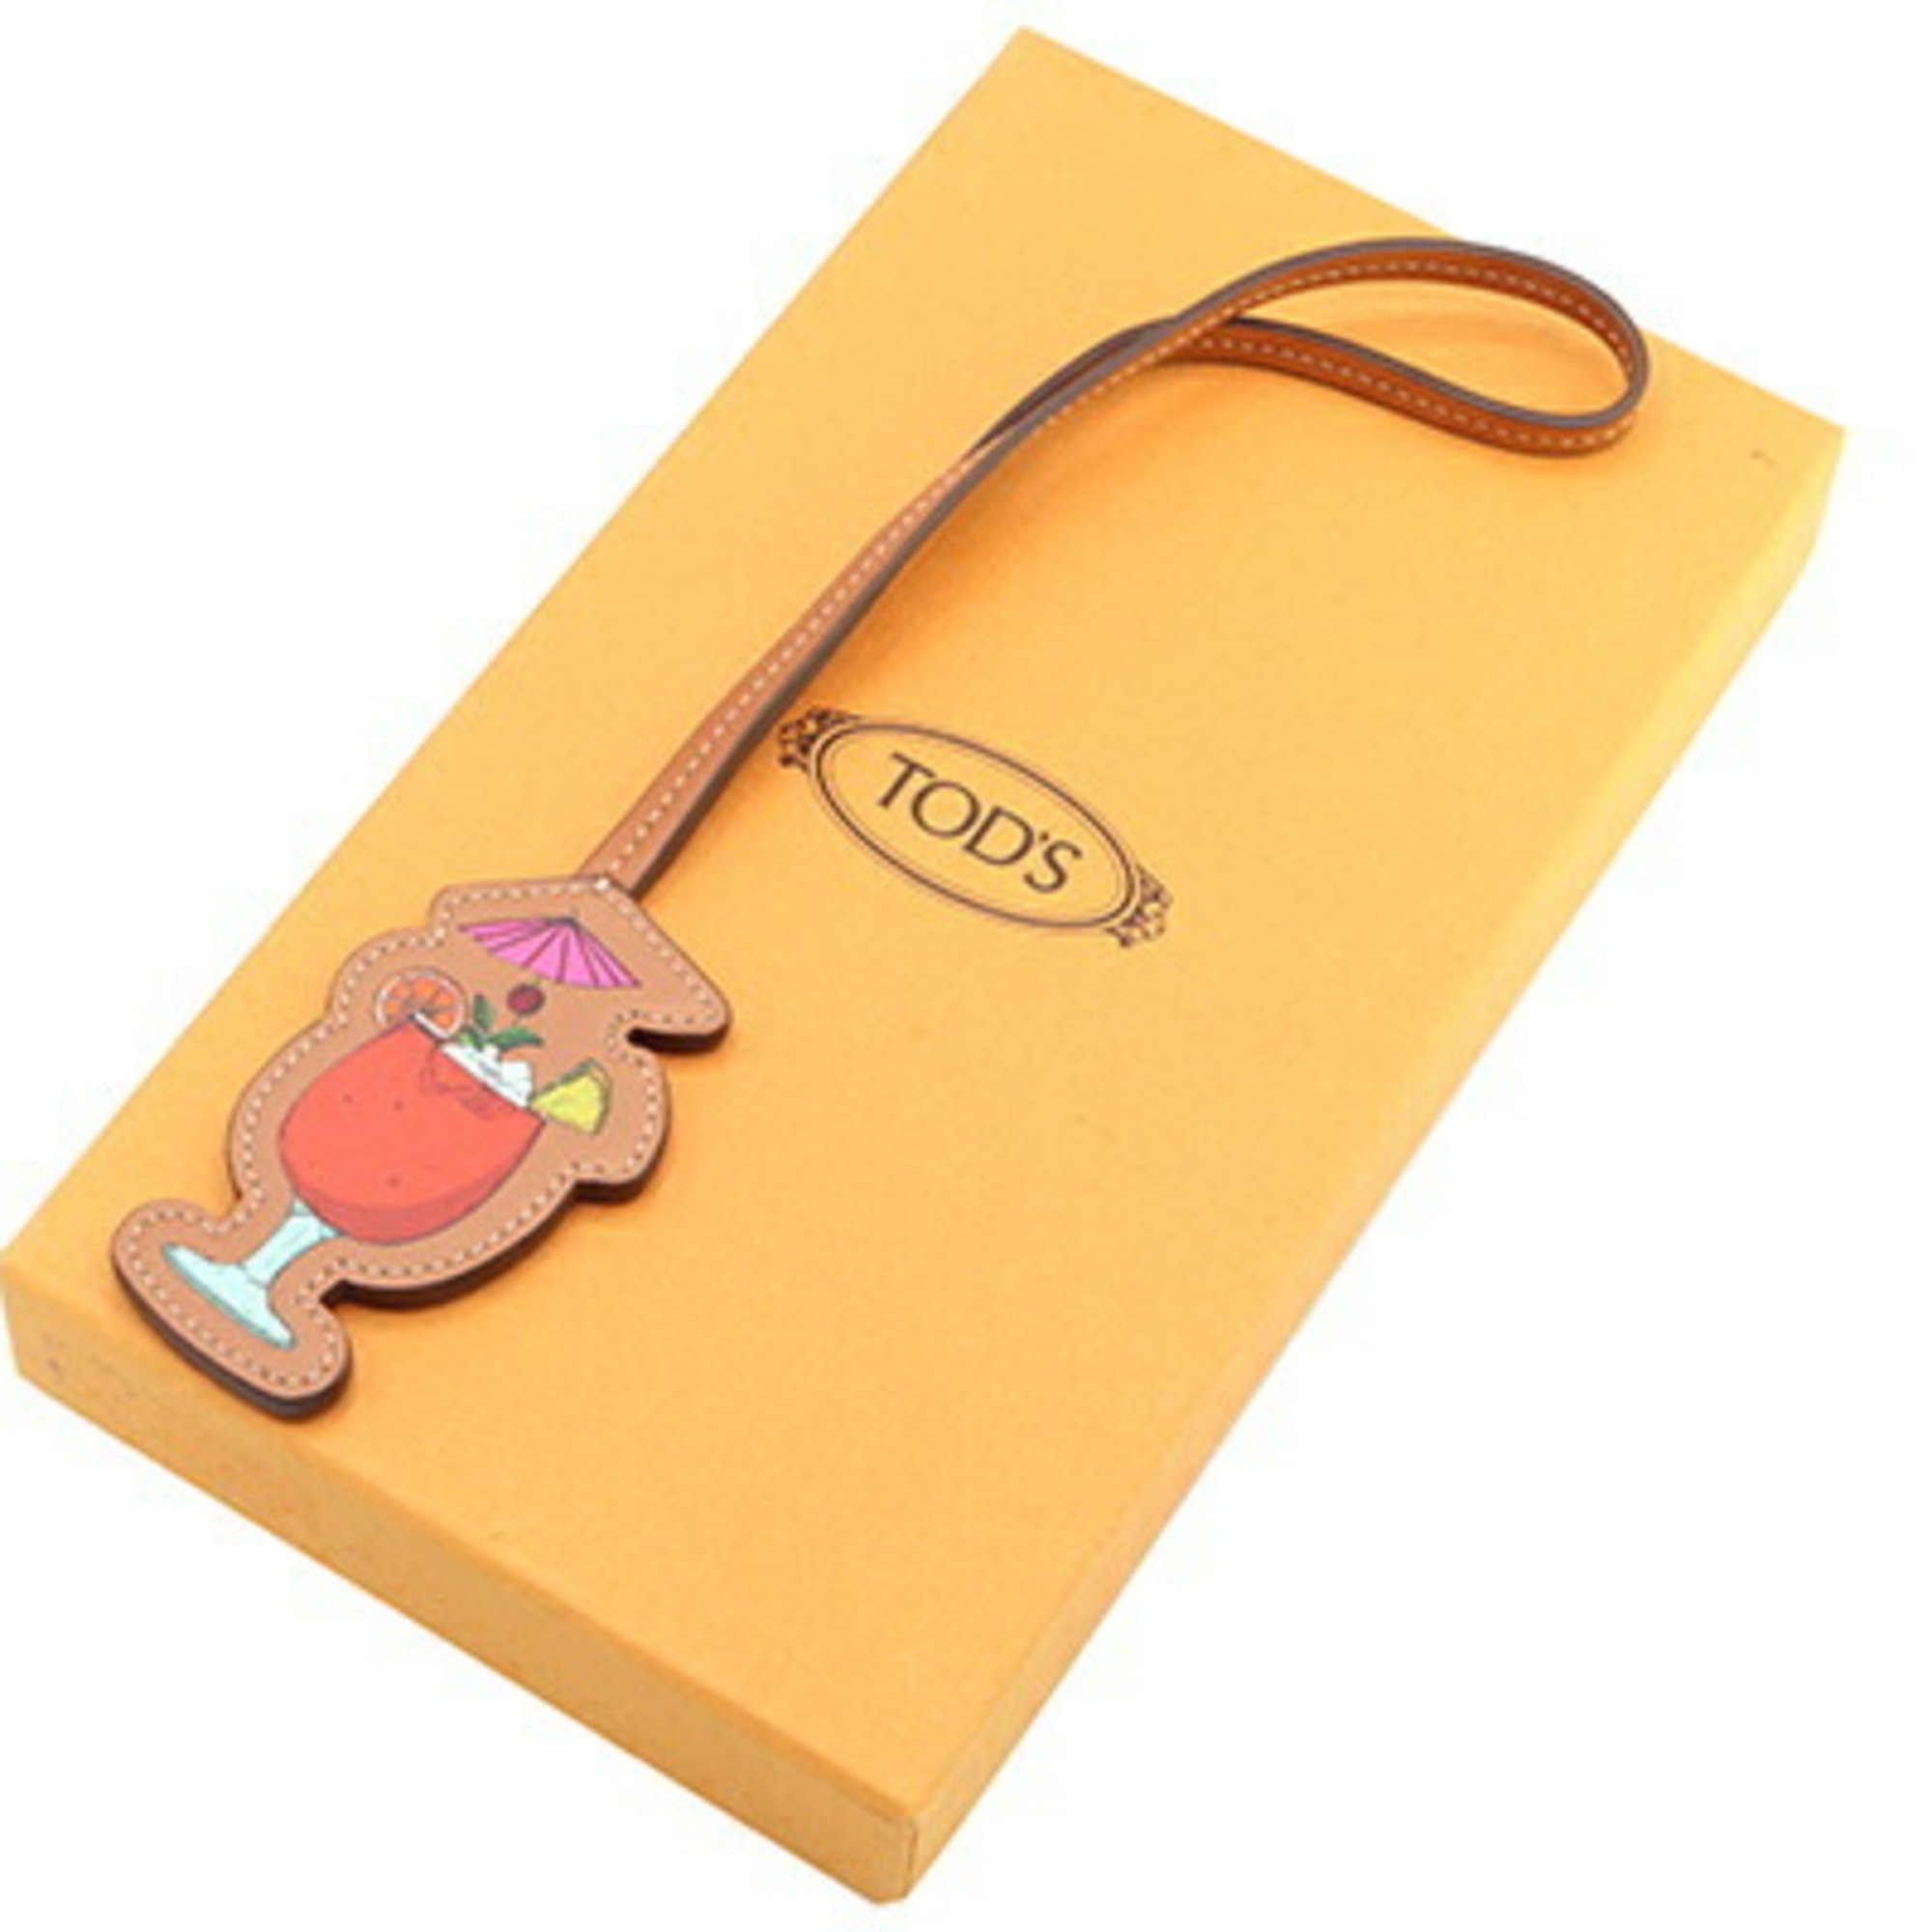 Tod's Bag Charm and Tarella Collaboration Island Brown Leather Cocktail Limited Edition Women's TOD'S